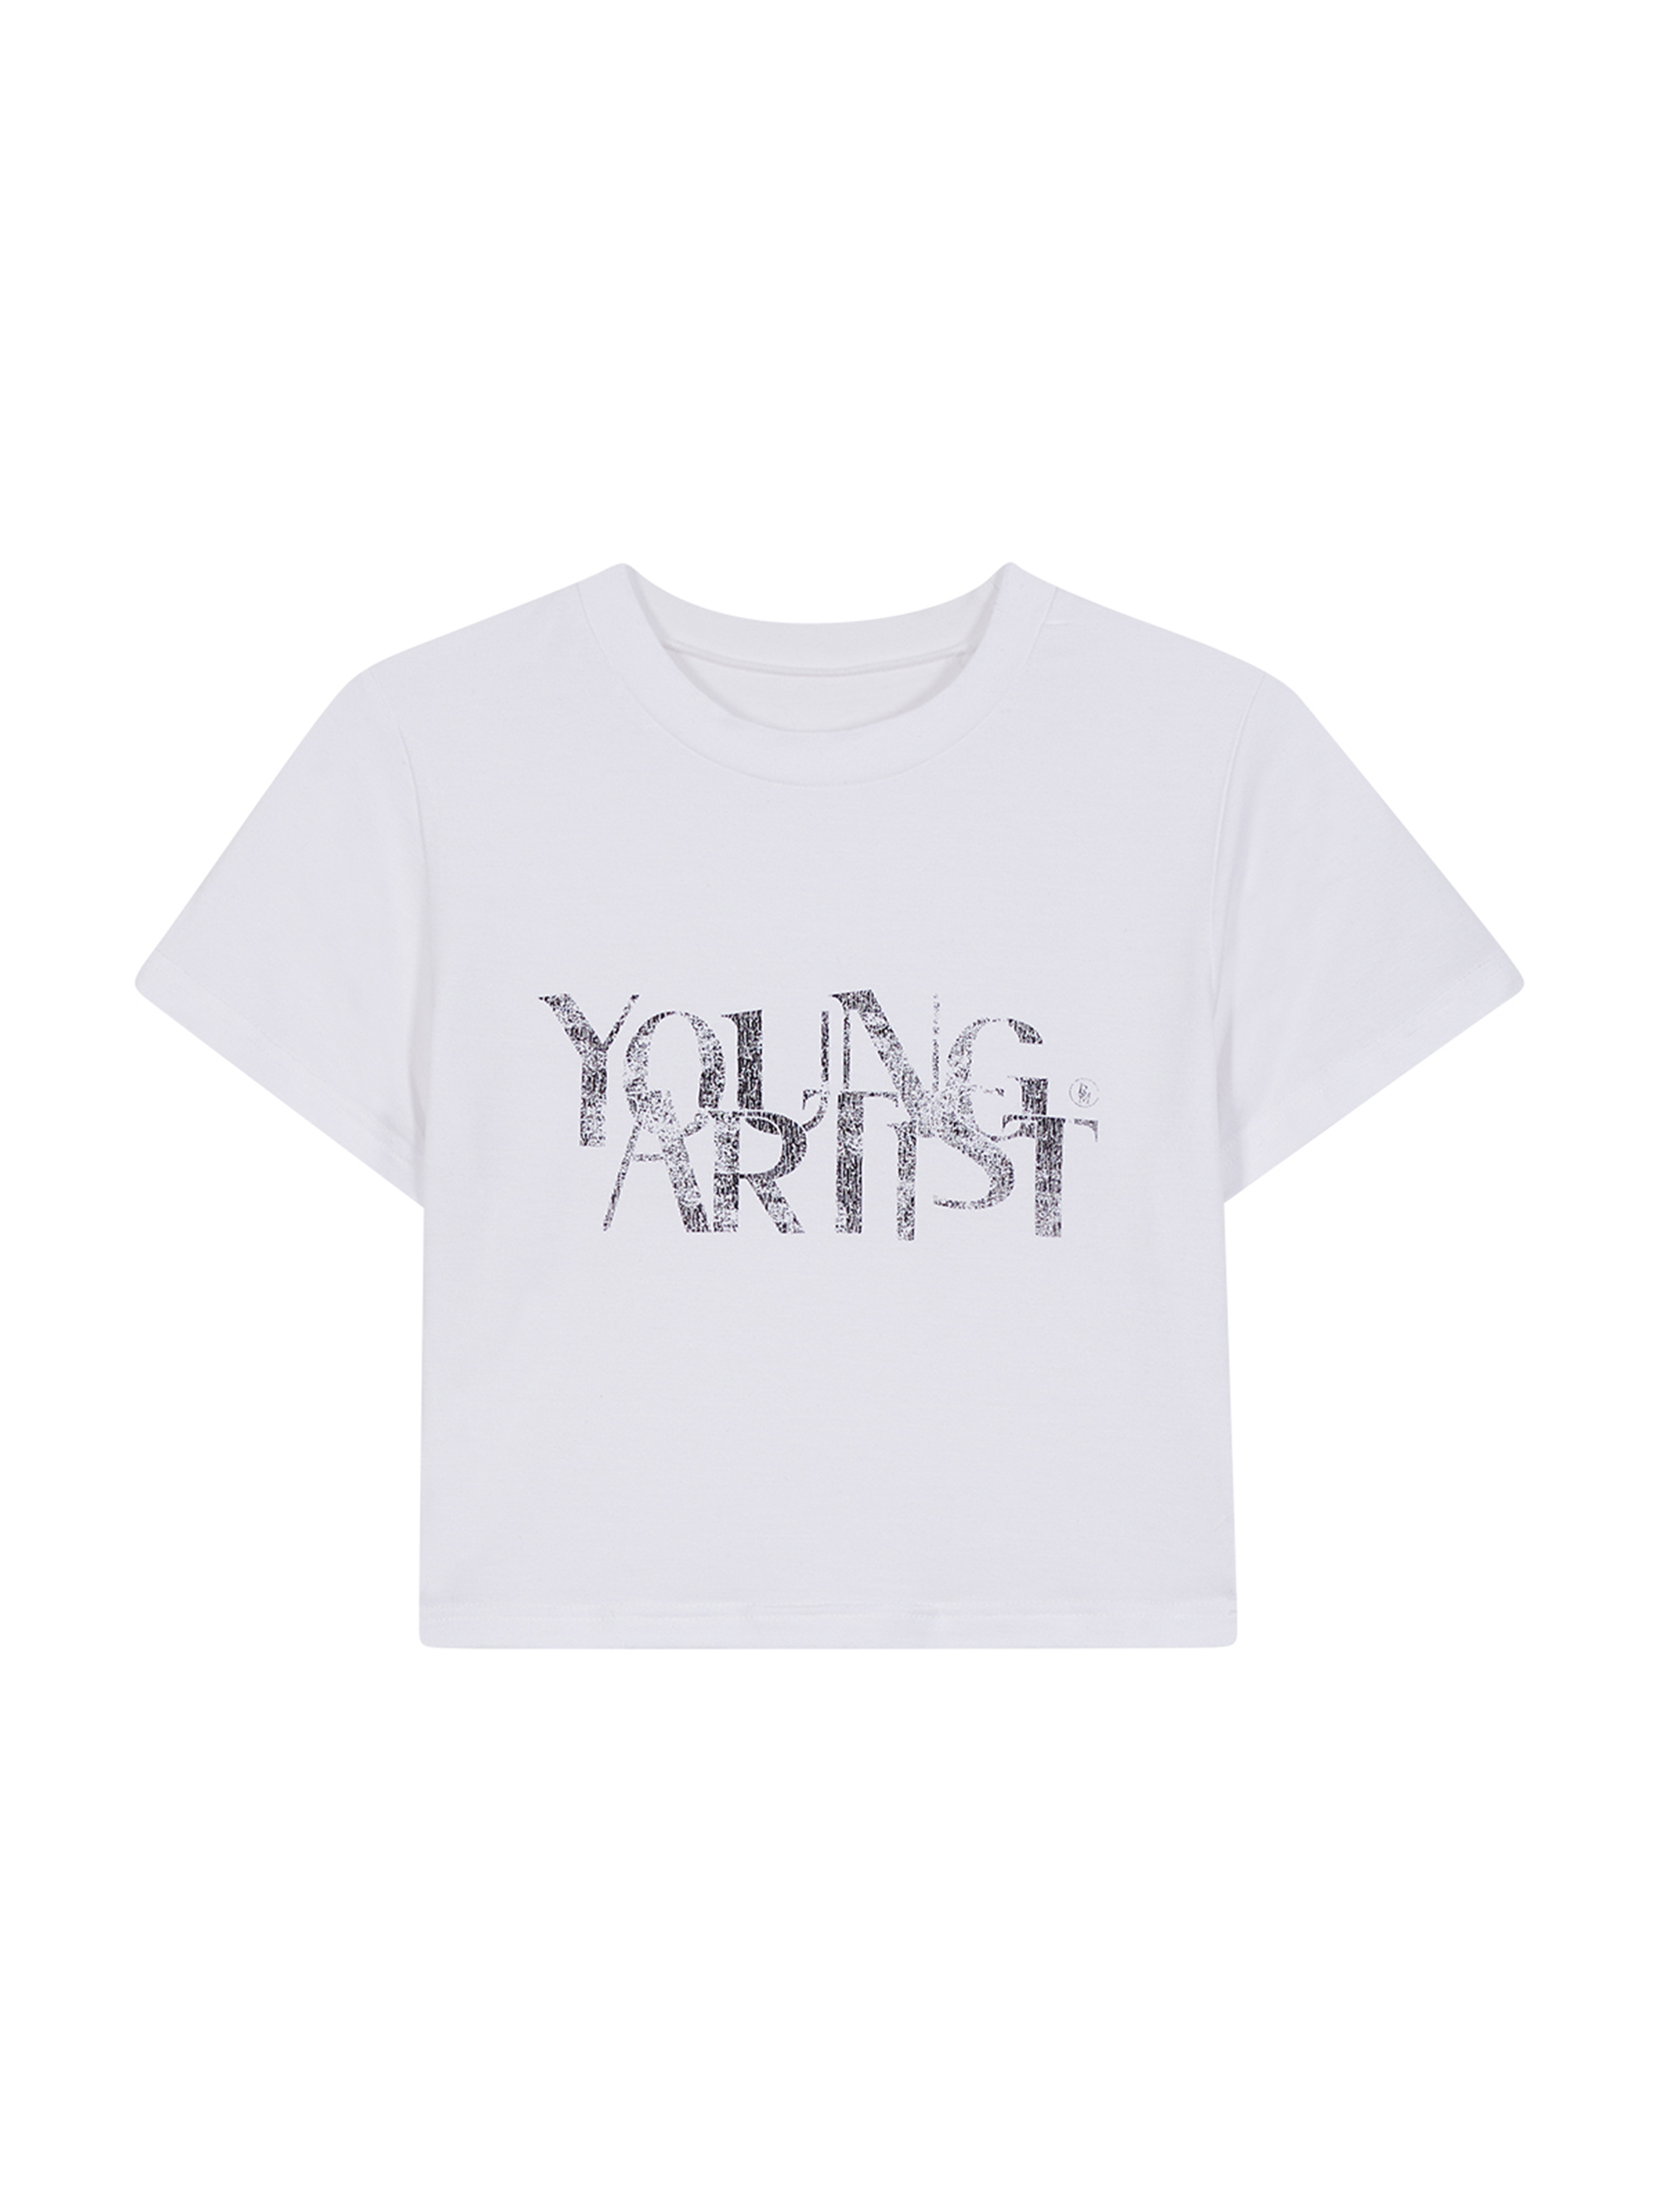 YOUNG ARTIST CROP TOP (WHITE)